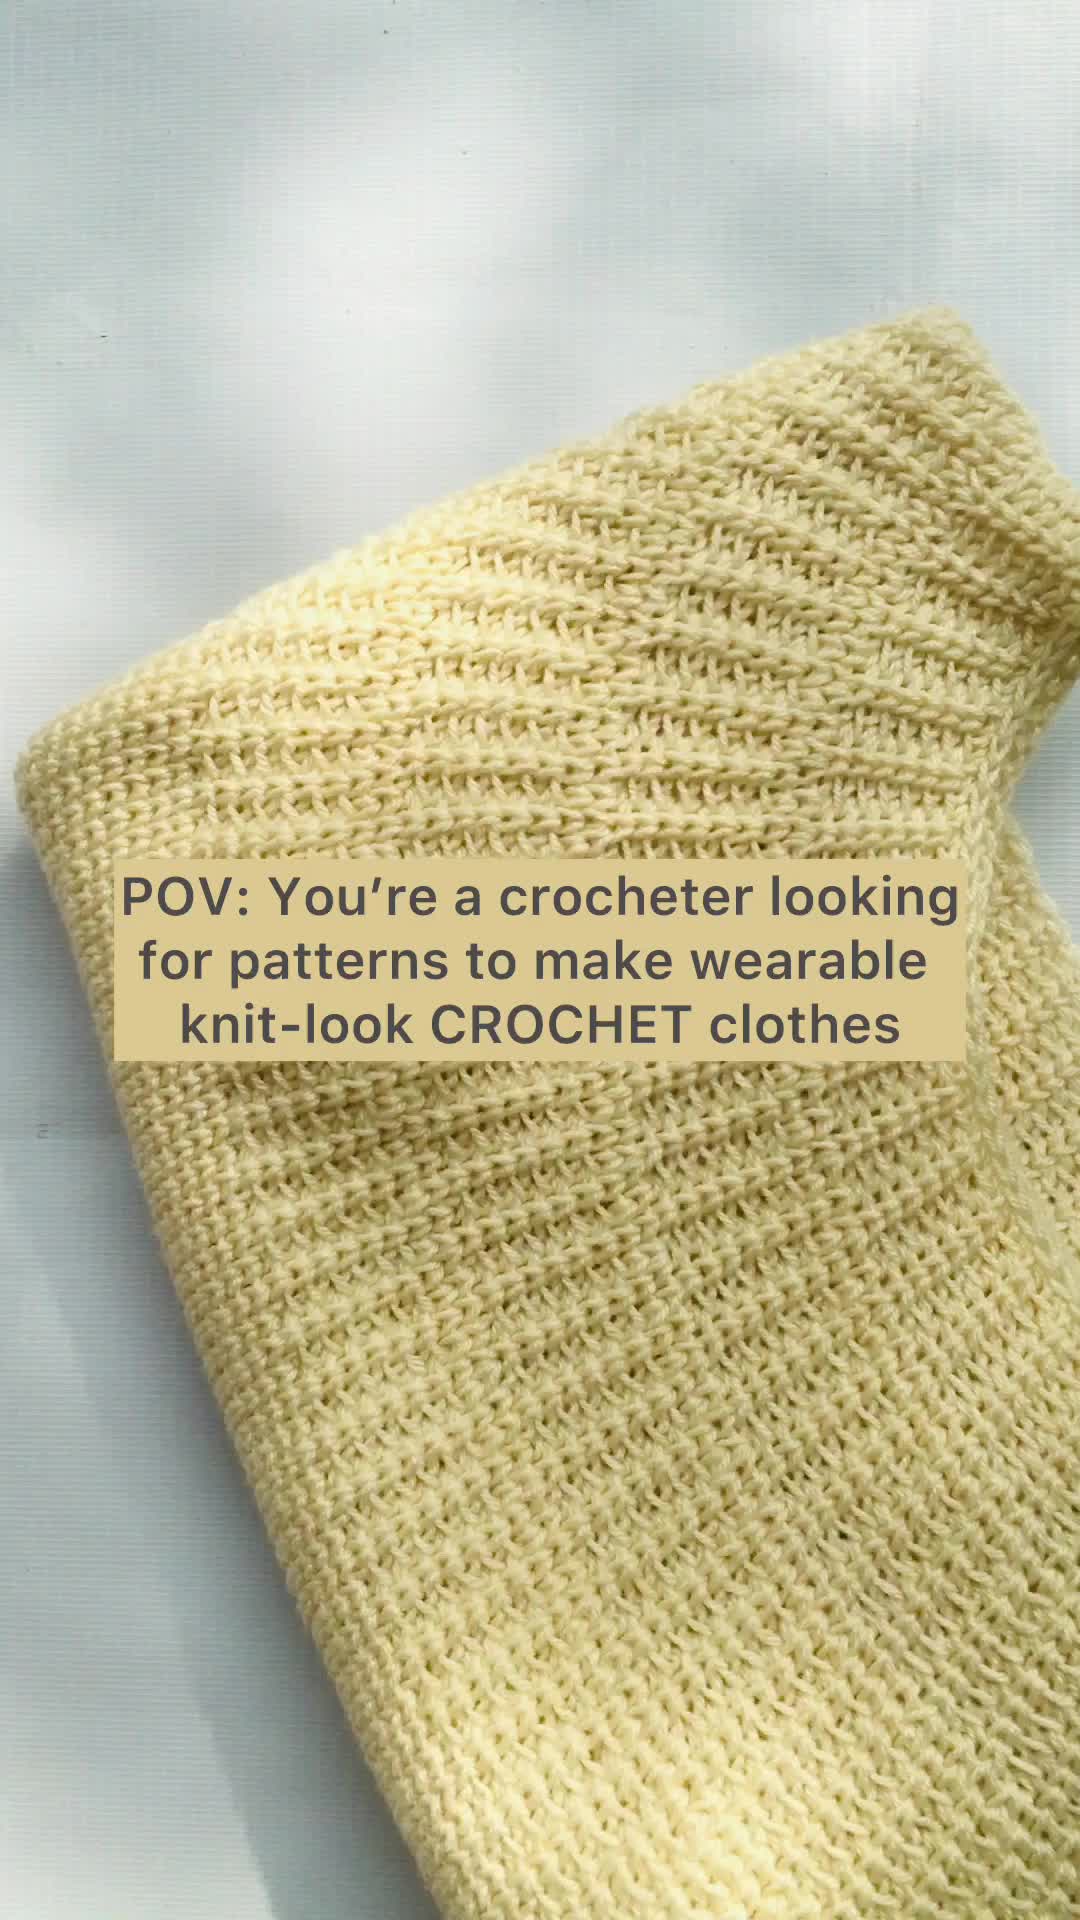 If you like simple yet elegant, classy yet understated knit-look crochet designs, you are in the right place. There are wearables for every season, pullovers, a cardigan, tops, tees, tanks, bralettes, scarves, shorts, a skirt and the prettiest pair of socks!  I offer you a fun time crocheting with unique and inventive construction